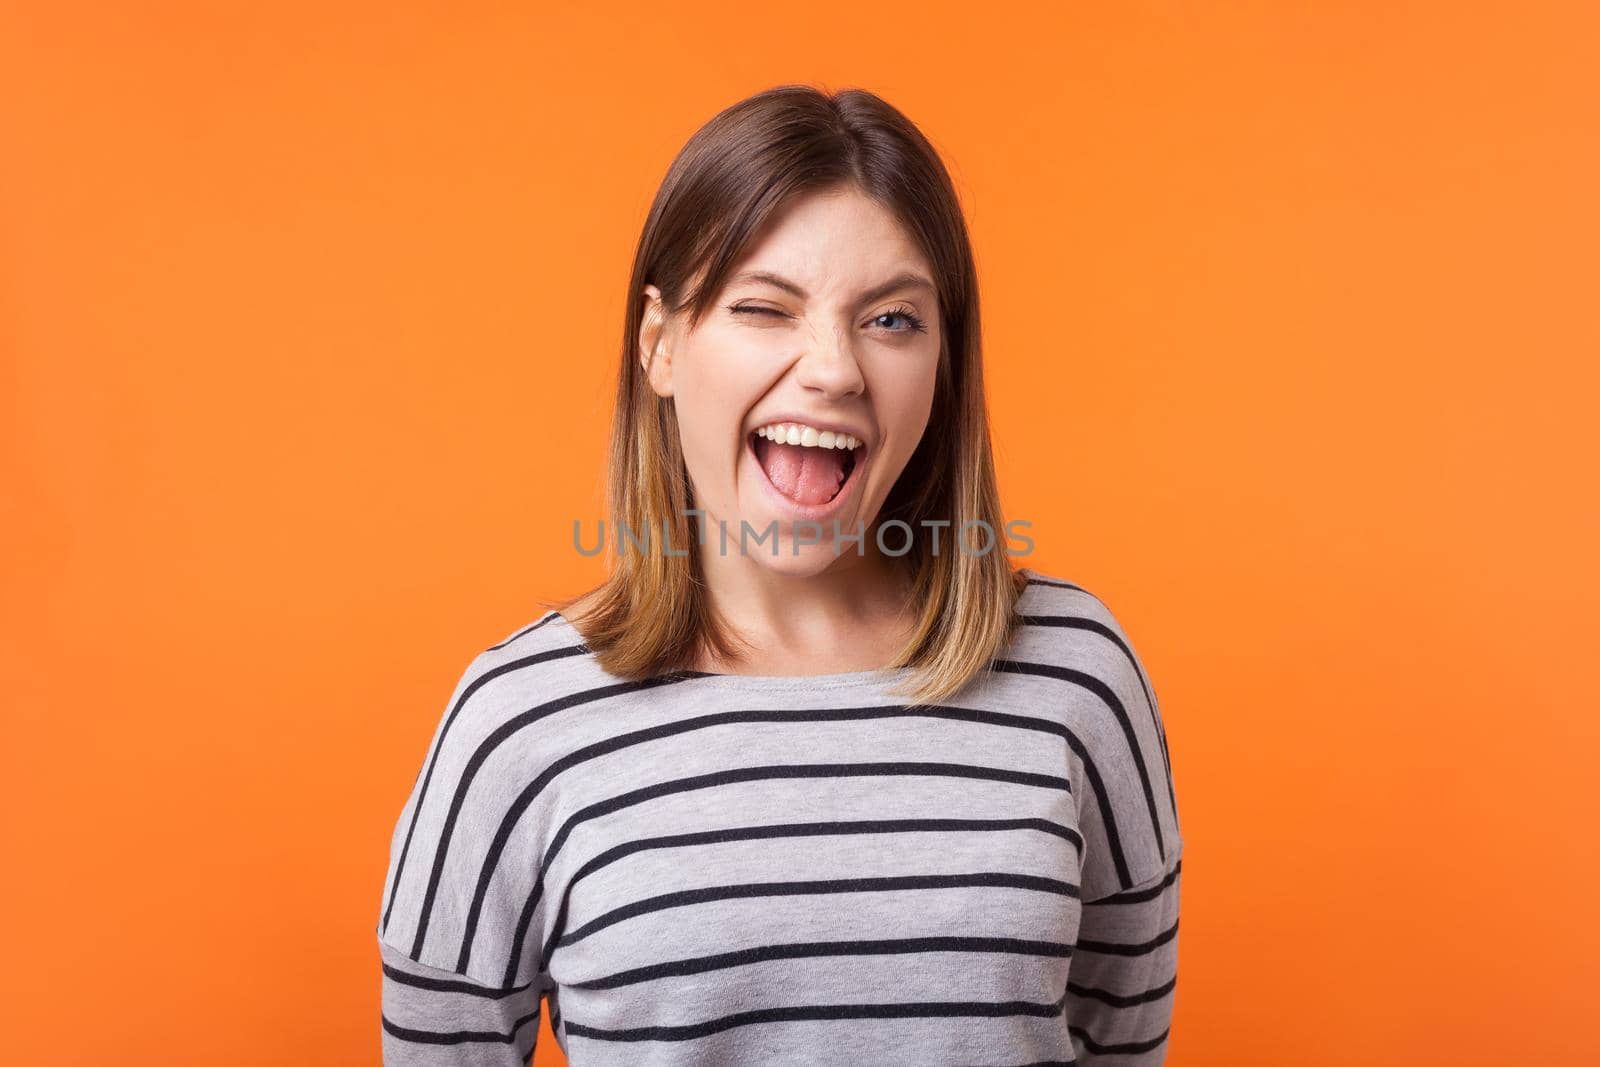 Portrait of cheerful amazing young woman with brown hair in long sleeve striped shirt standing with open mouth, winking playfully at camera, flirting. indoor studio shot isolated on orange background